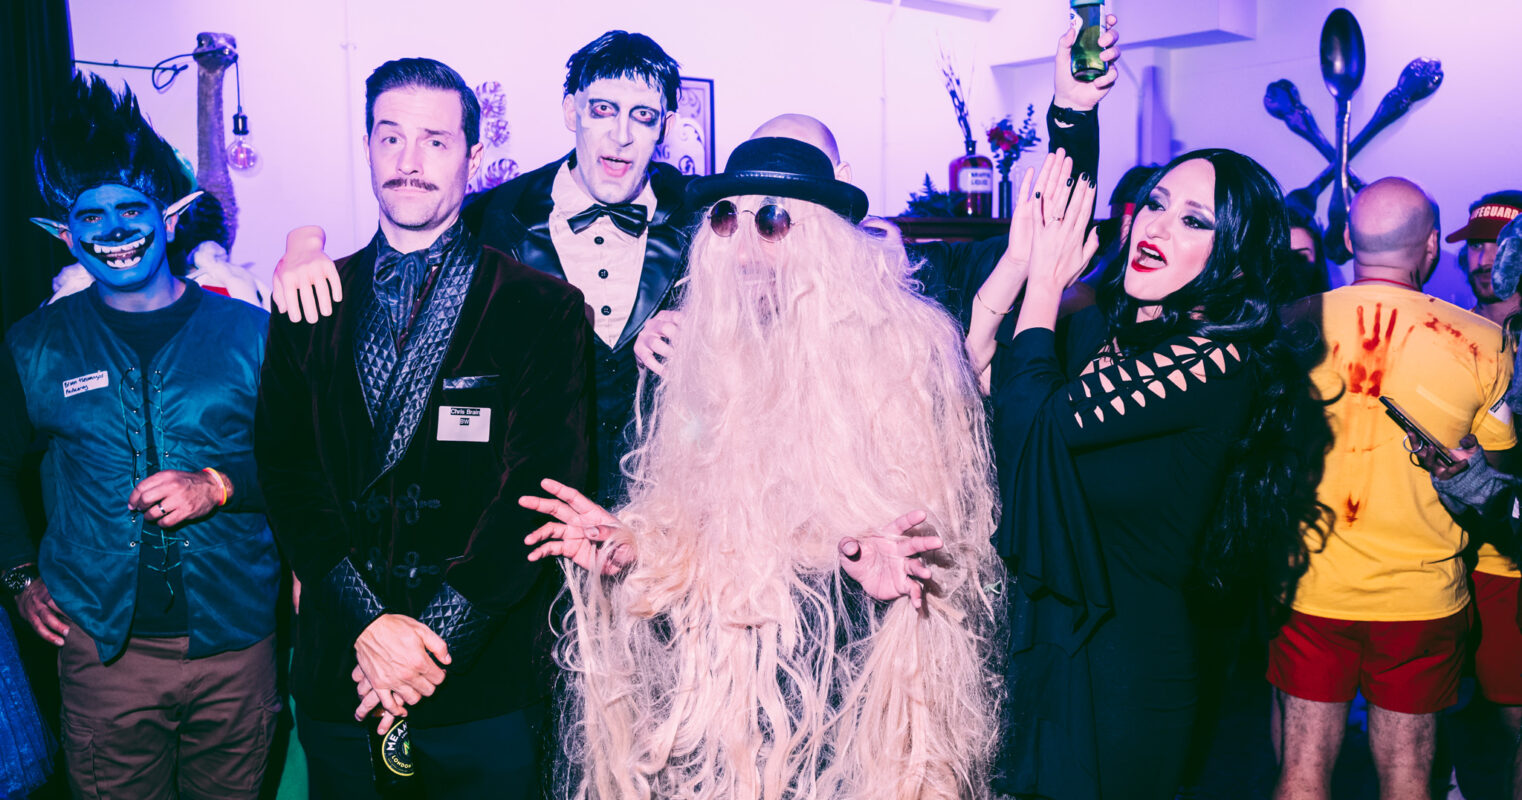 A colorful costume party with individuals dressed as mythical and horror characters, capturing a festive and humorous atmosphere.